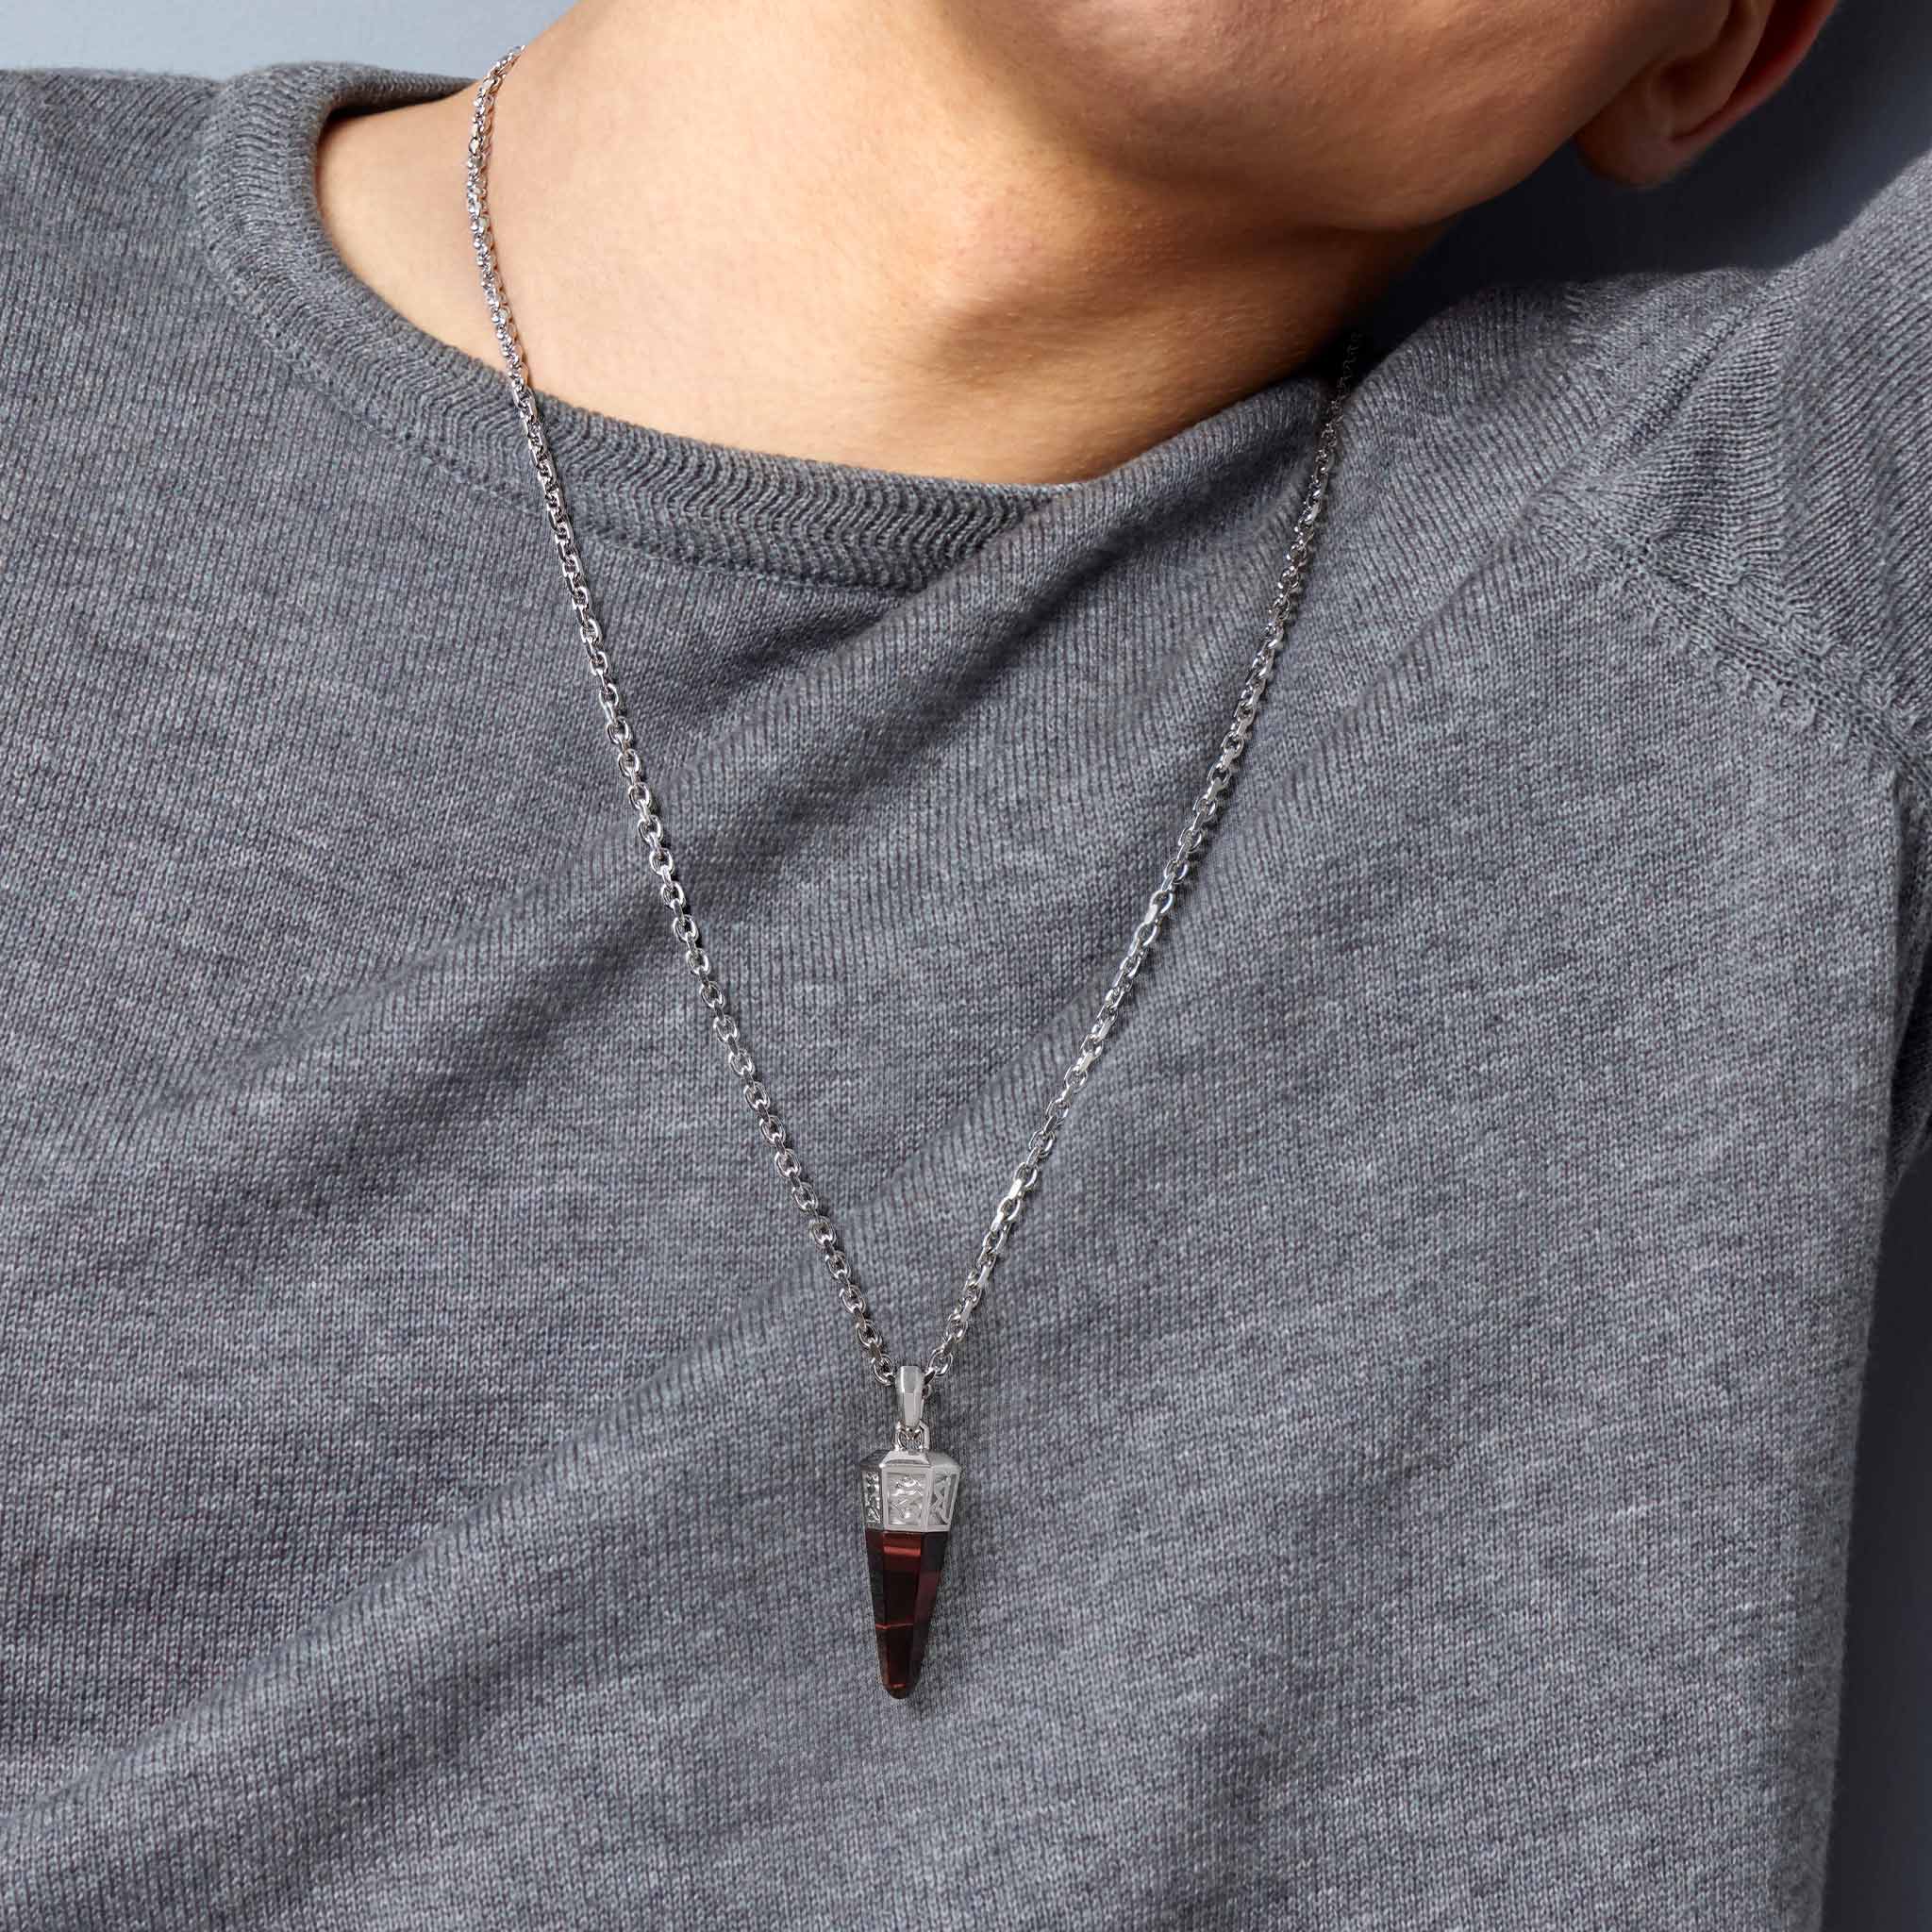 Men's Powerful Sanskrit Mantra Necklace with Red Tiger Eye Necklaces WAA FASHION GROUP 